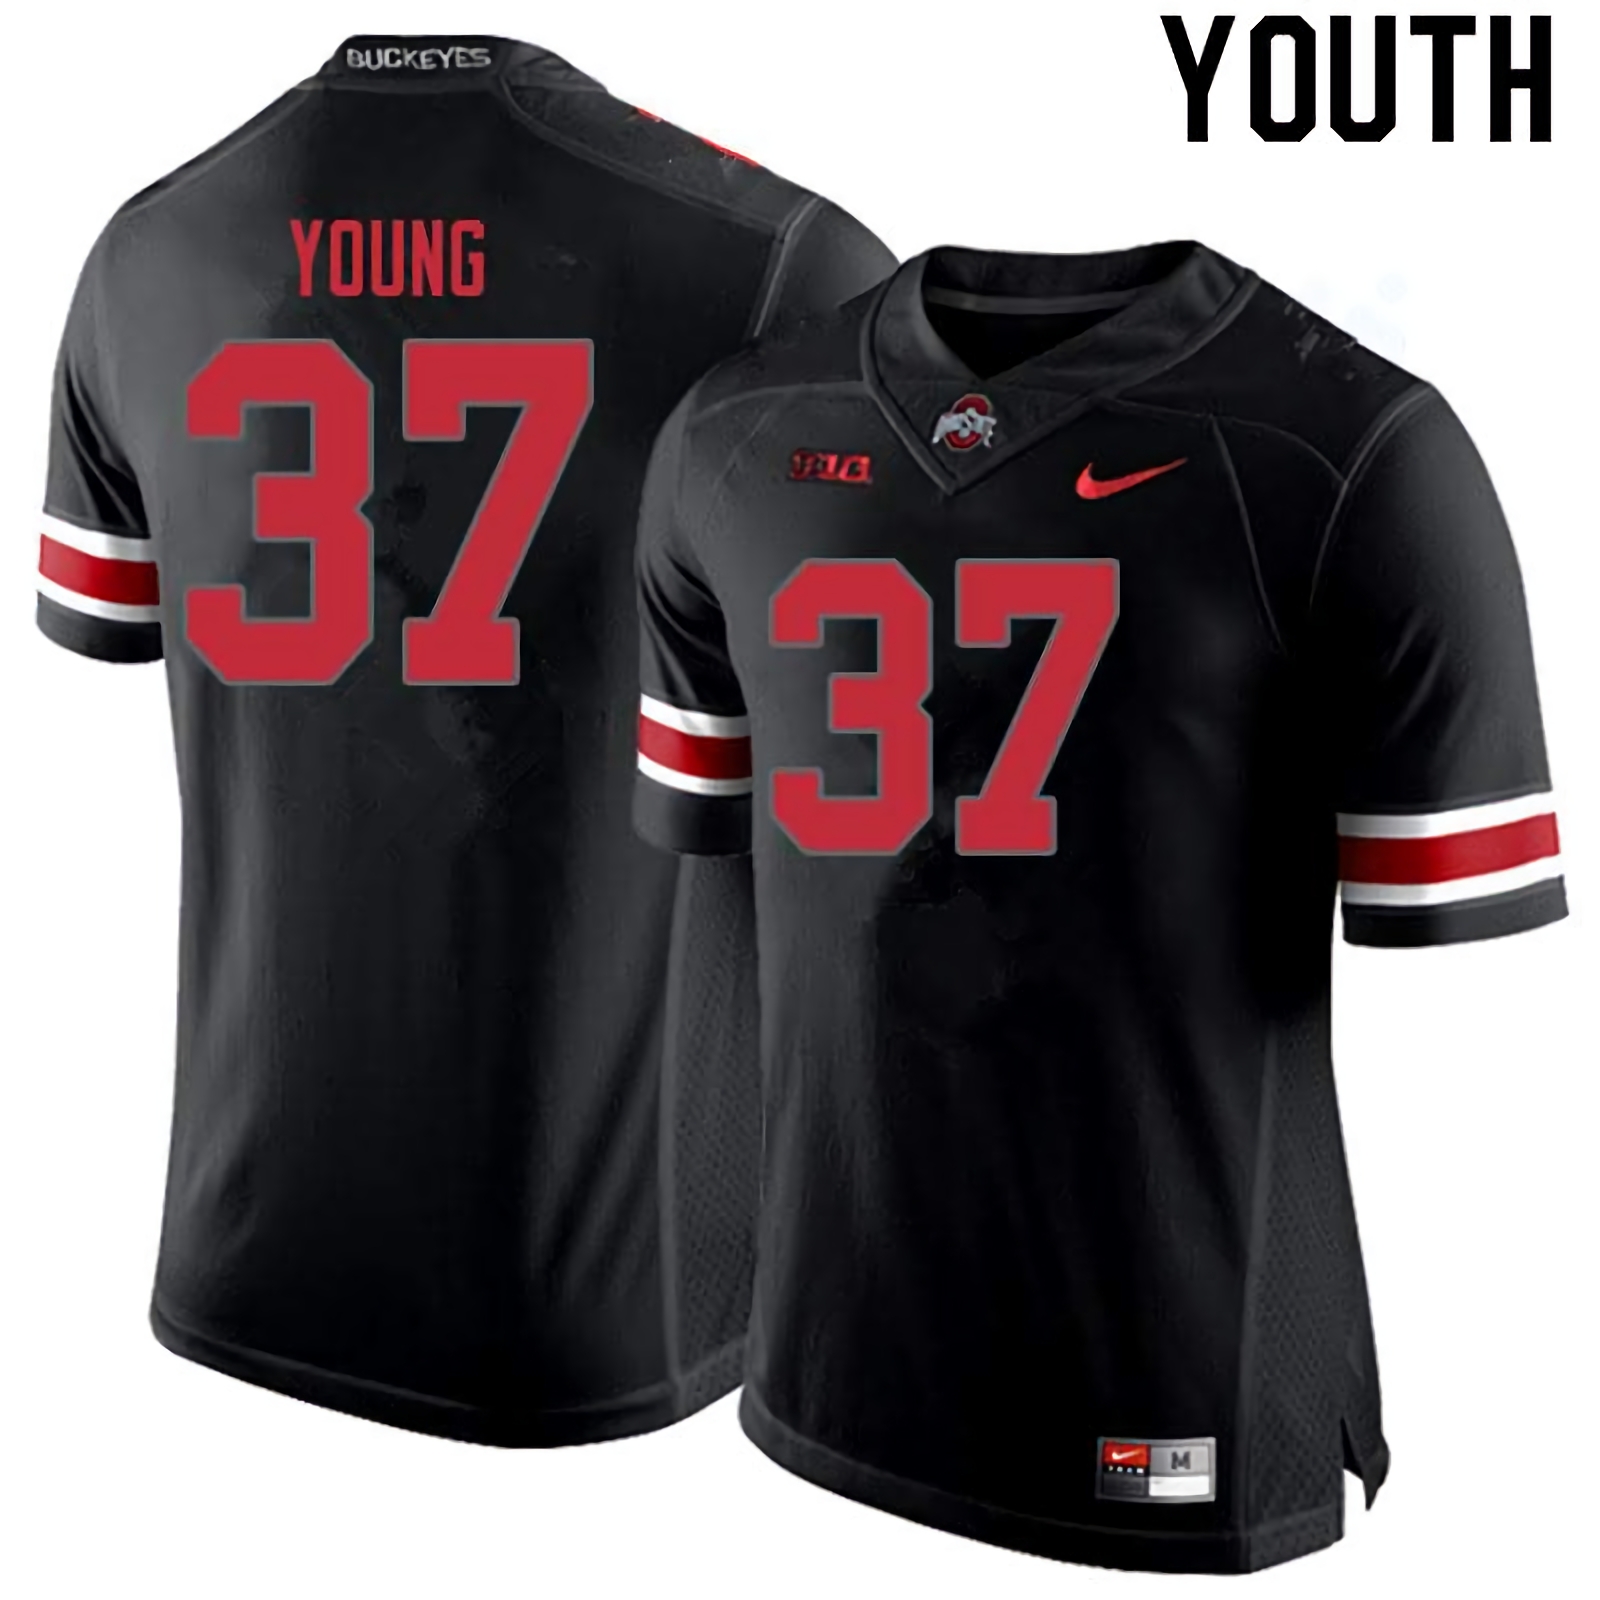 Craig Young Ohio State Buckeyes Youth NCAA #37 Nike Blackout College Stitched Football Jersey SRE4556MV